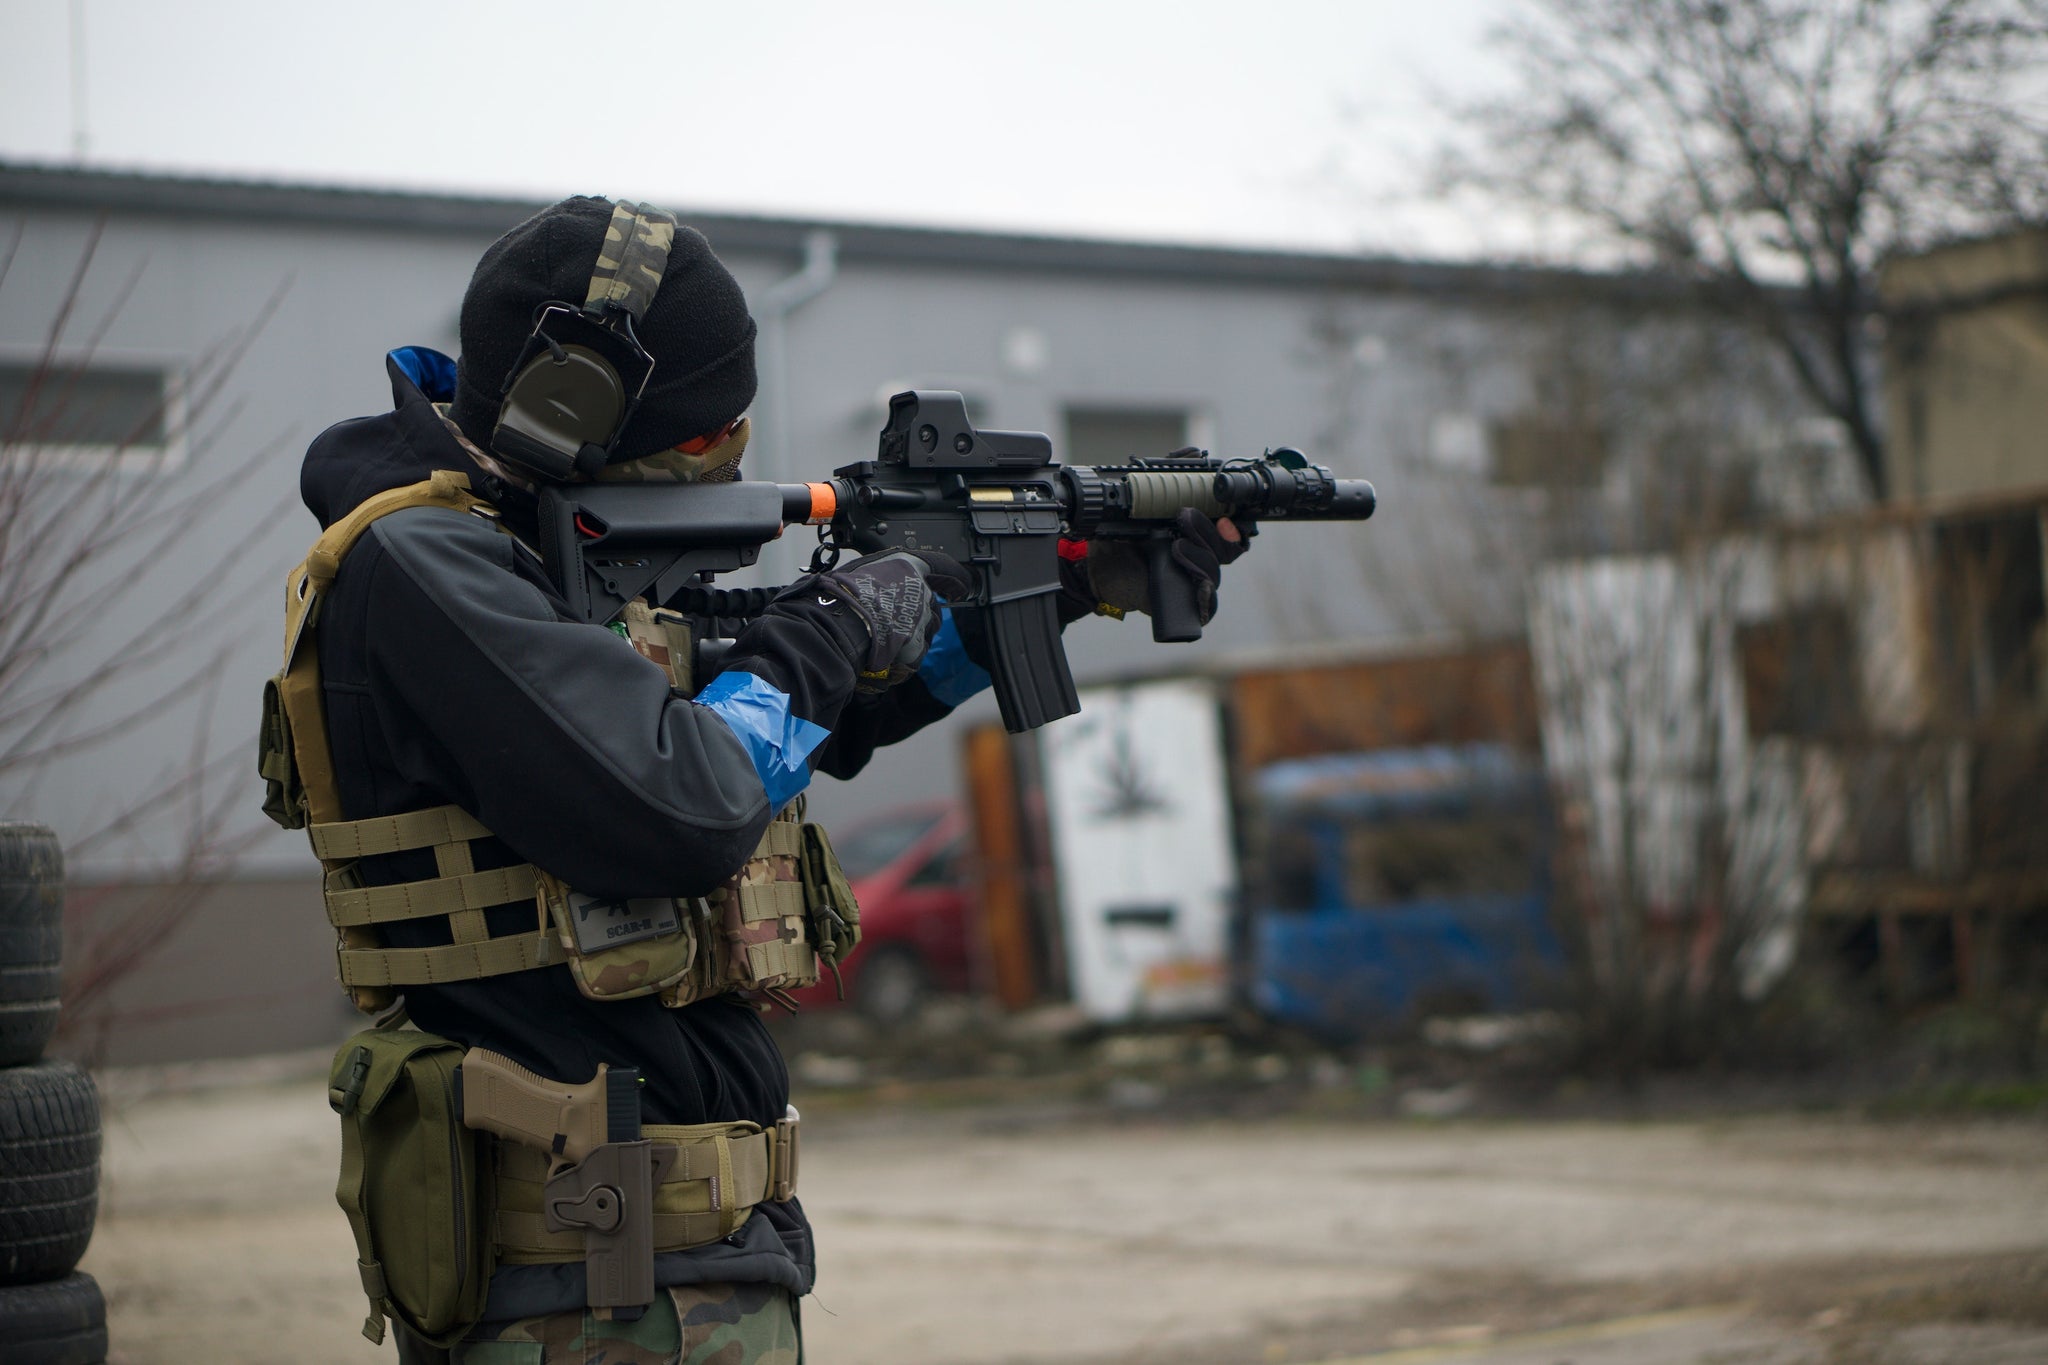 Accessoires airsoft – Action Airsoft